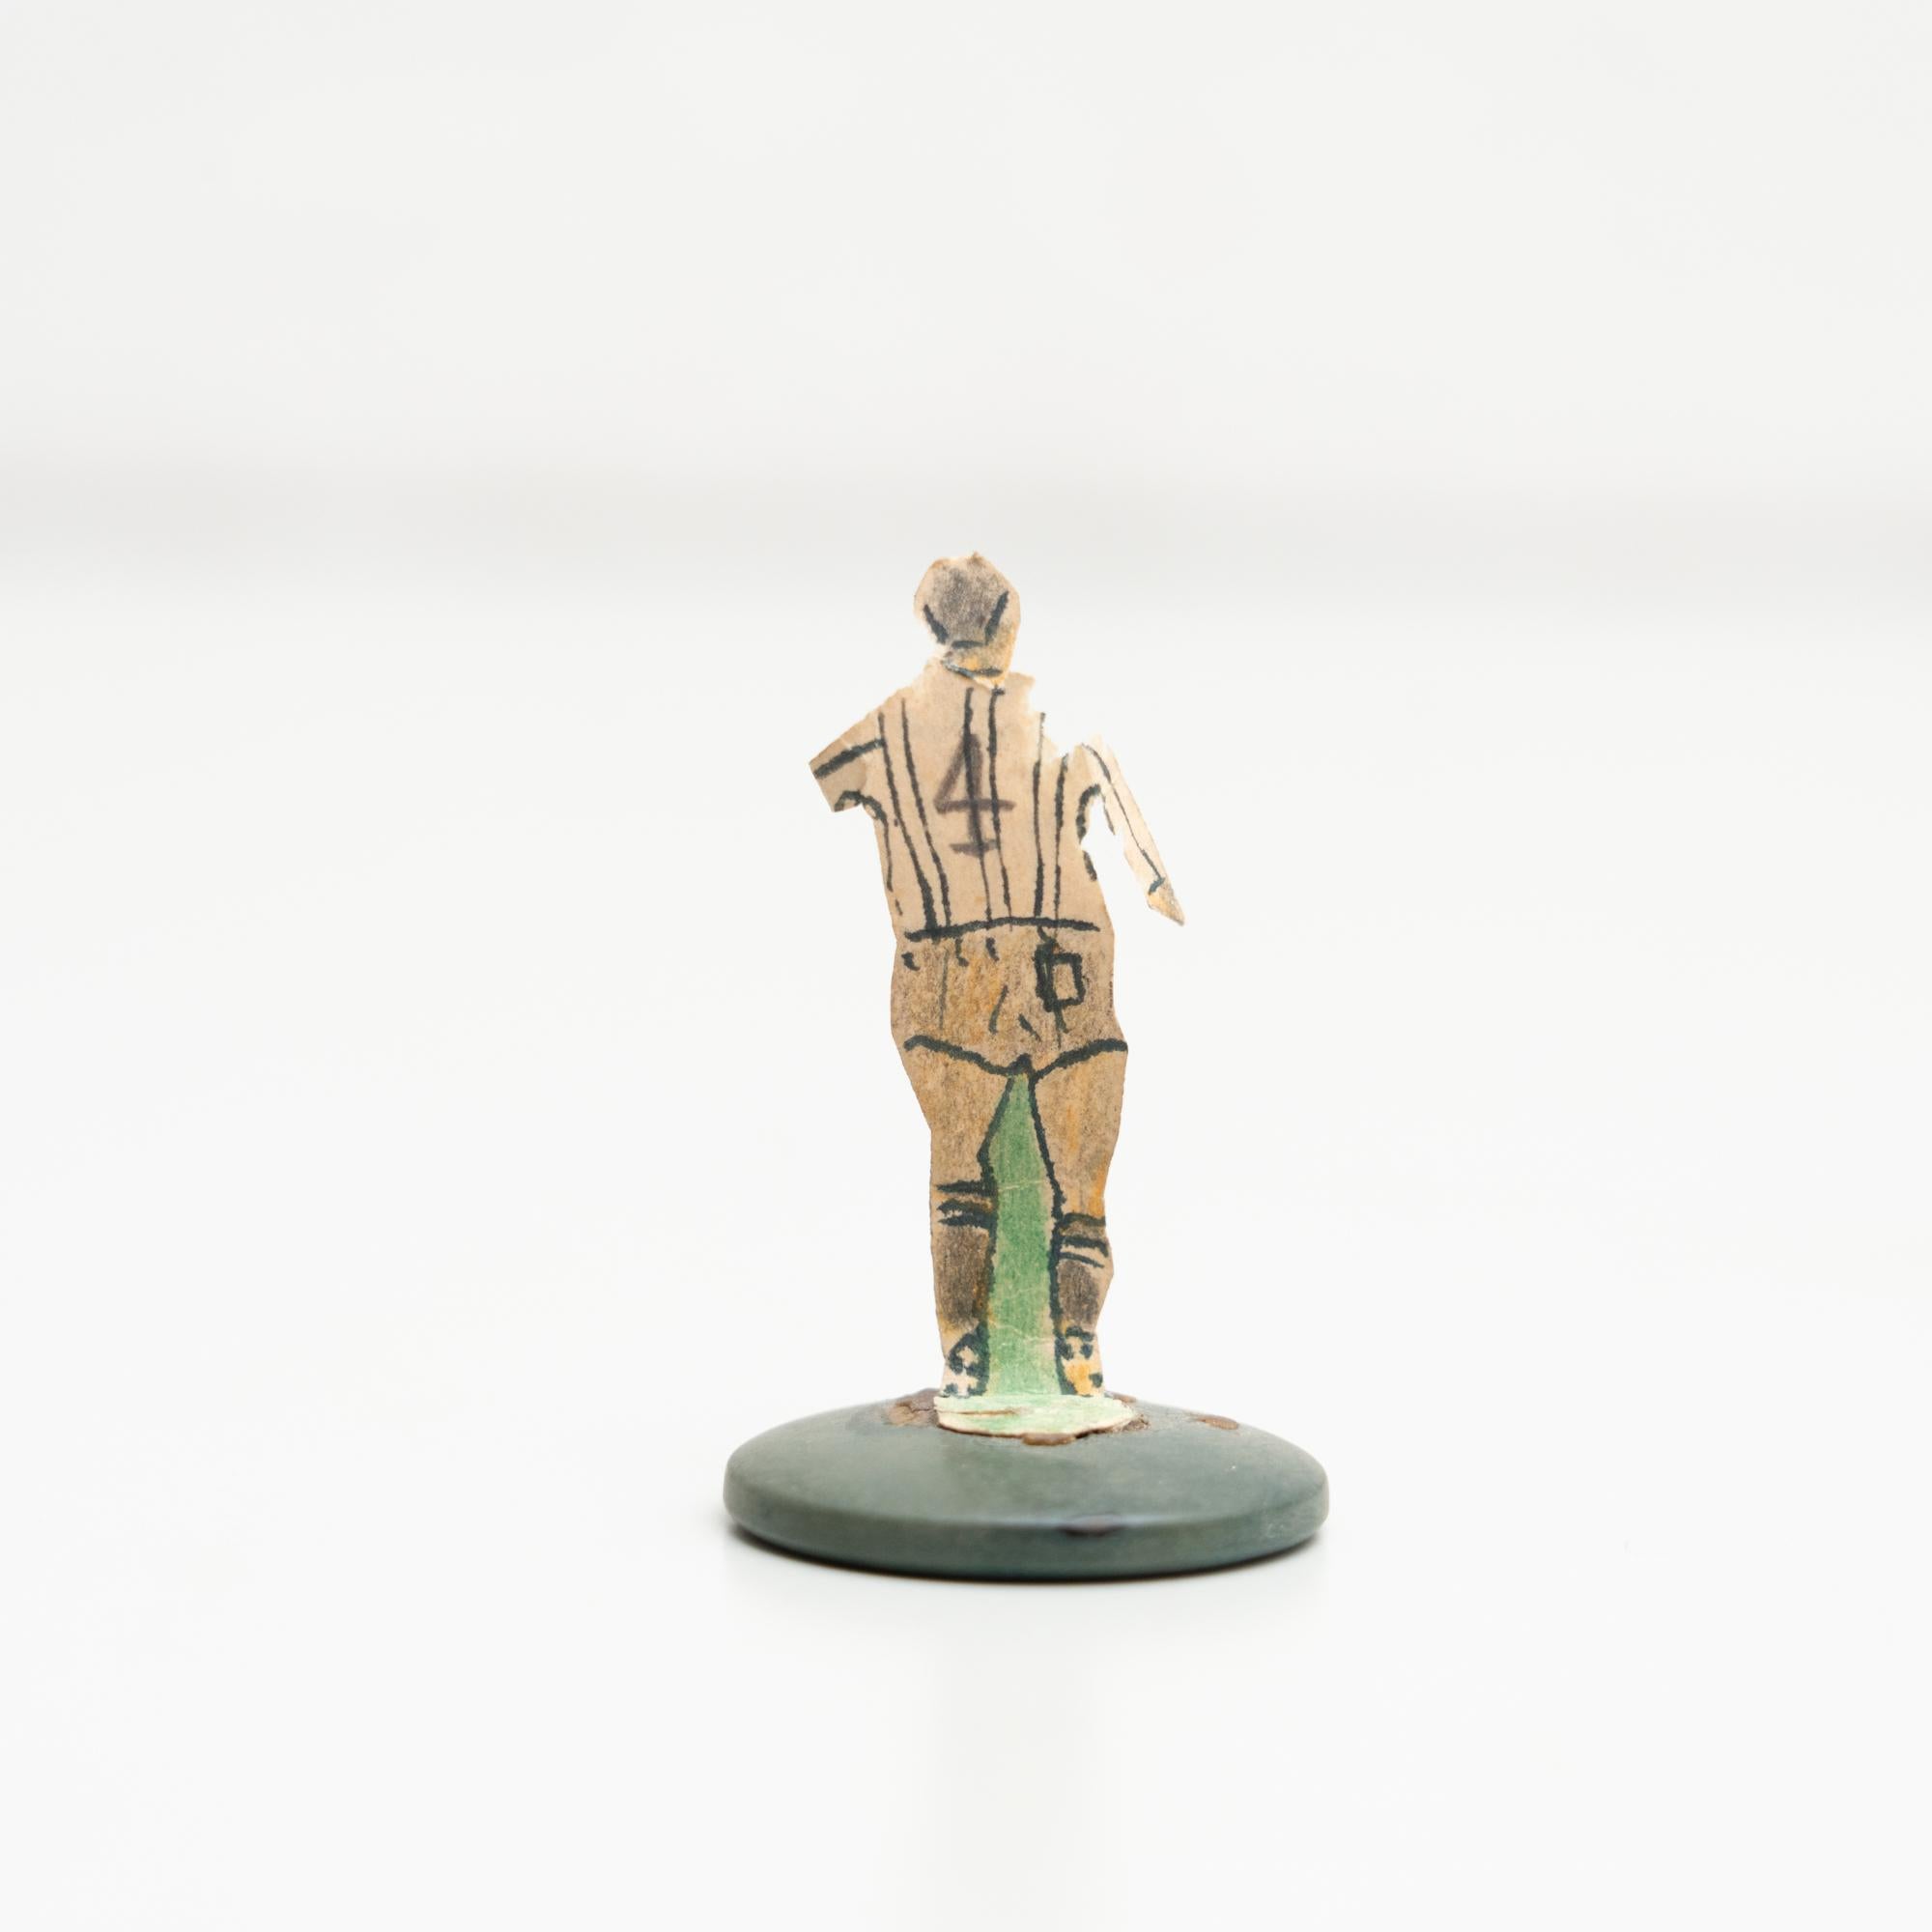 Spanish Set of 3 Traditional Antique Button Soccer Game Figures, circa 1950 For Sale